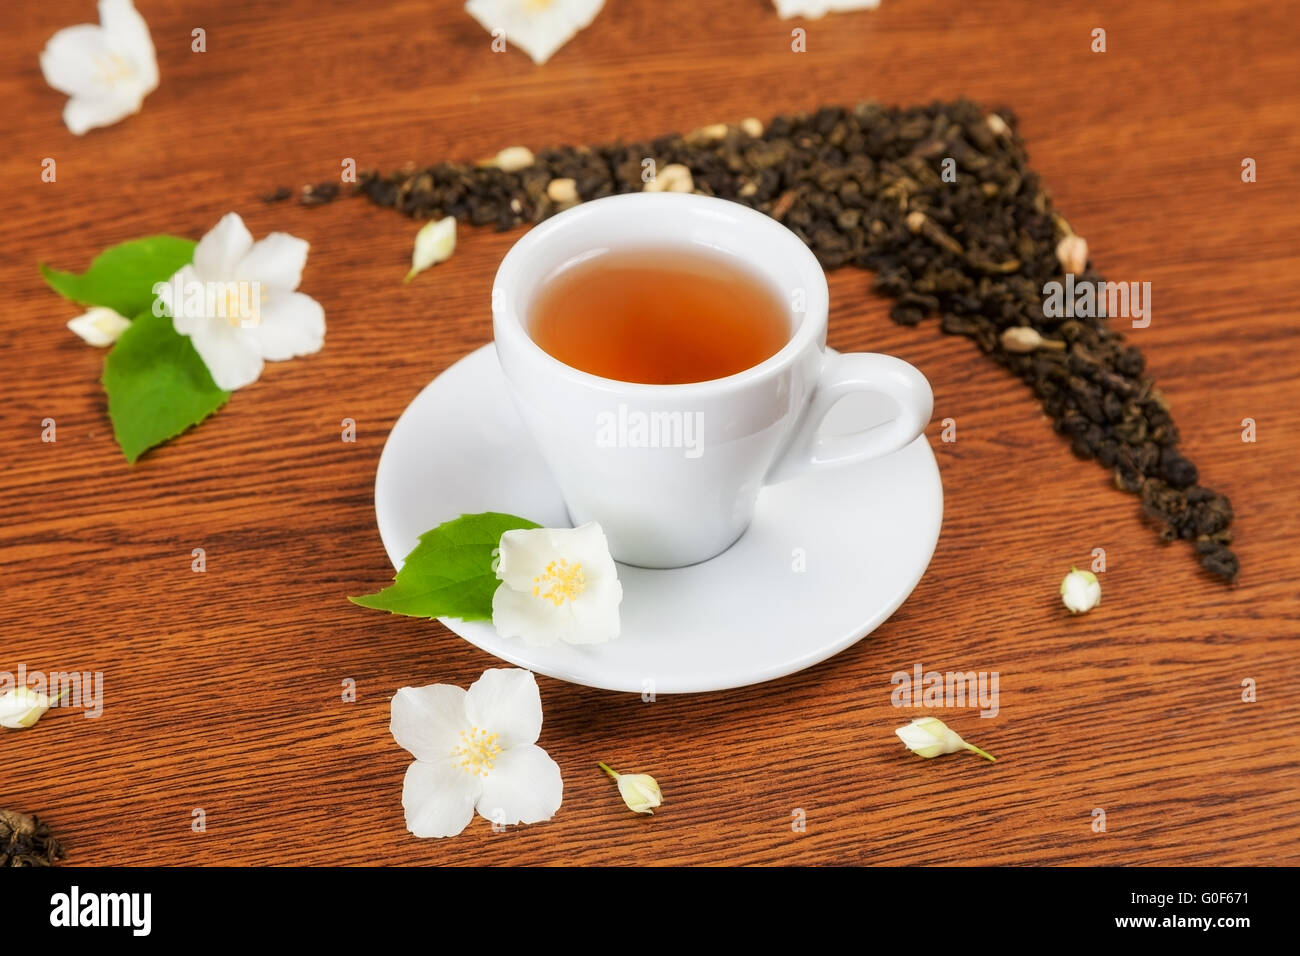 white cup and saucer with jasmine flowers on a wooden table. background Stock Photo